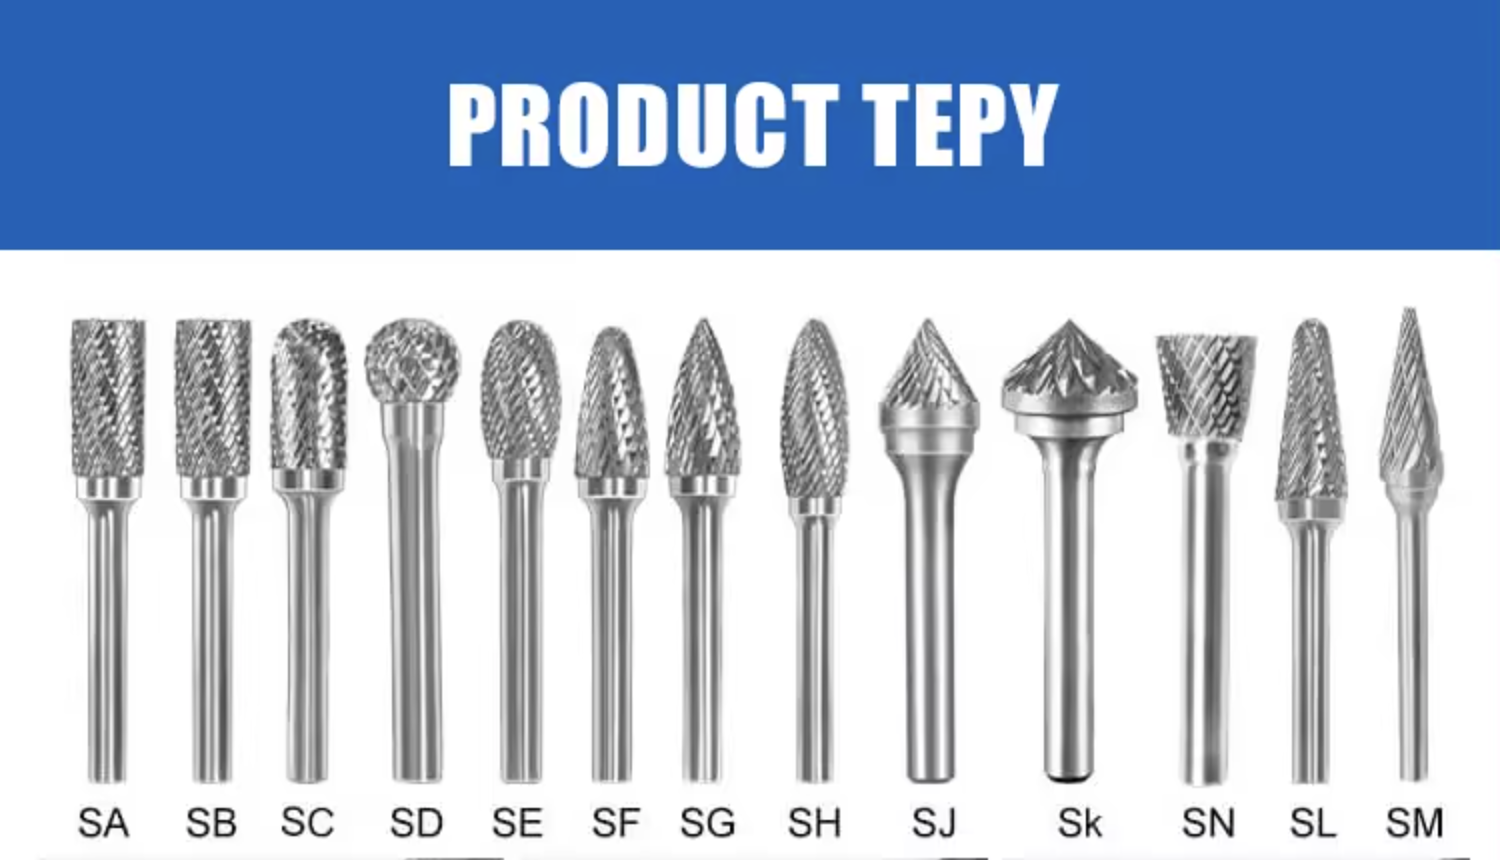 https://www.kedeltool.com/14-6mm-shank-tungsten-carbide-rotary-burrs-product/